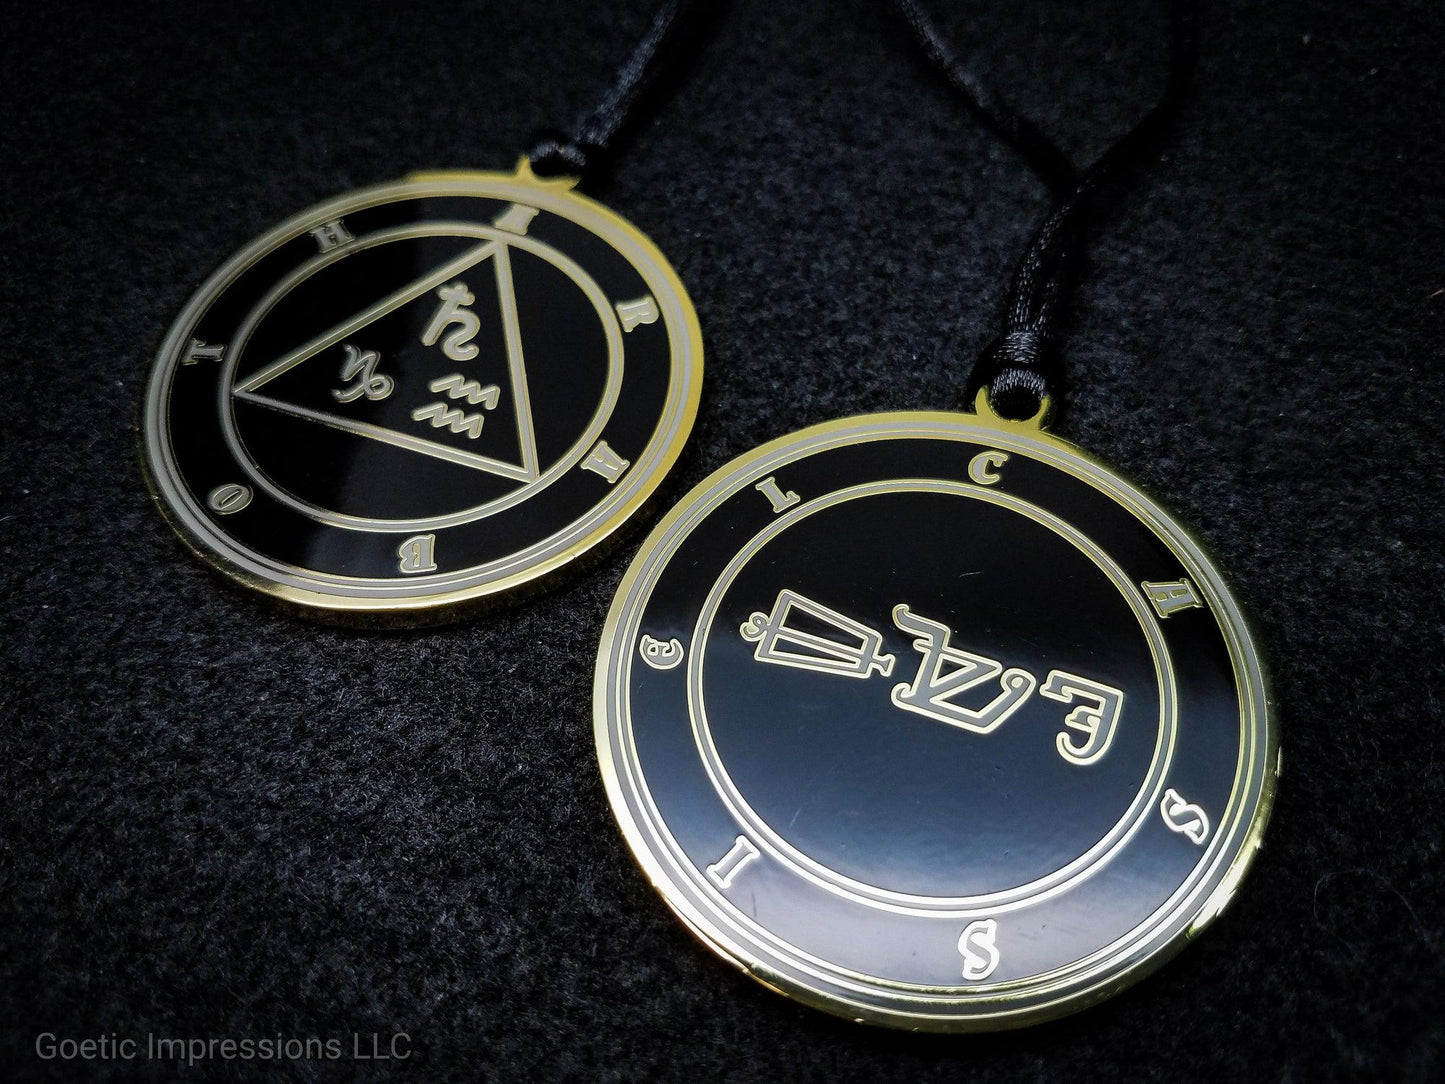 Heptameron Inspired Archangel Pendant featuring the seal and sigils of Archangel Cassiel.  Featuring on the reverse side of the talsiman, the Heaven Araboth and astrological symbols of Saturn, Capricorn and Aquarius based on Cornelius Agrippa